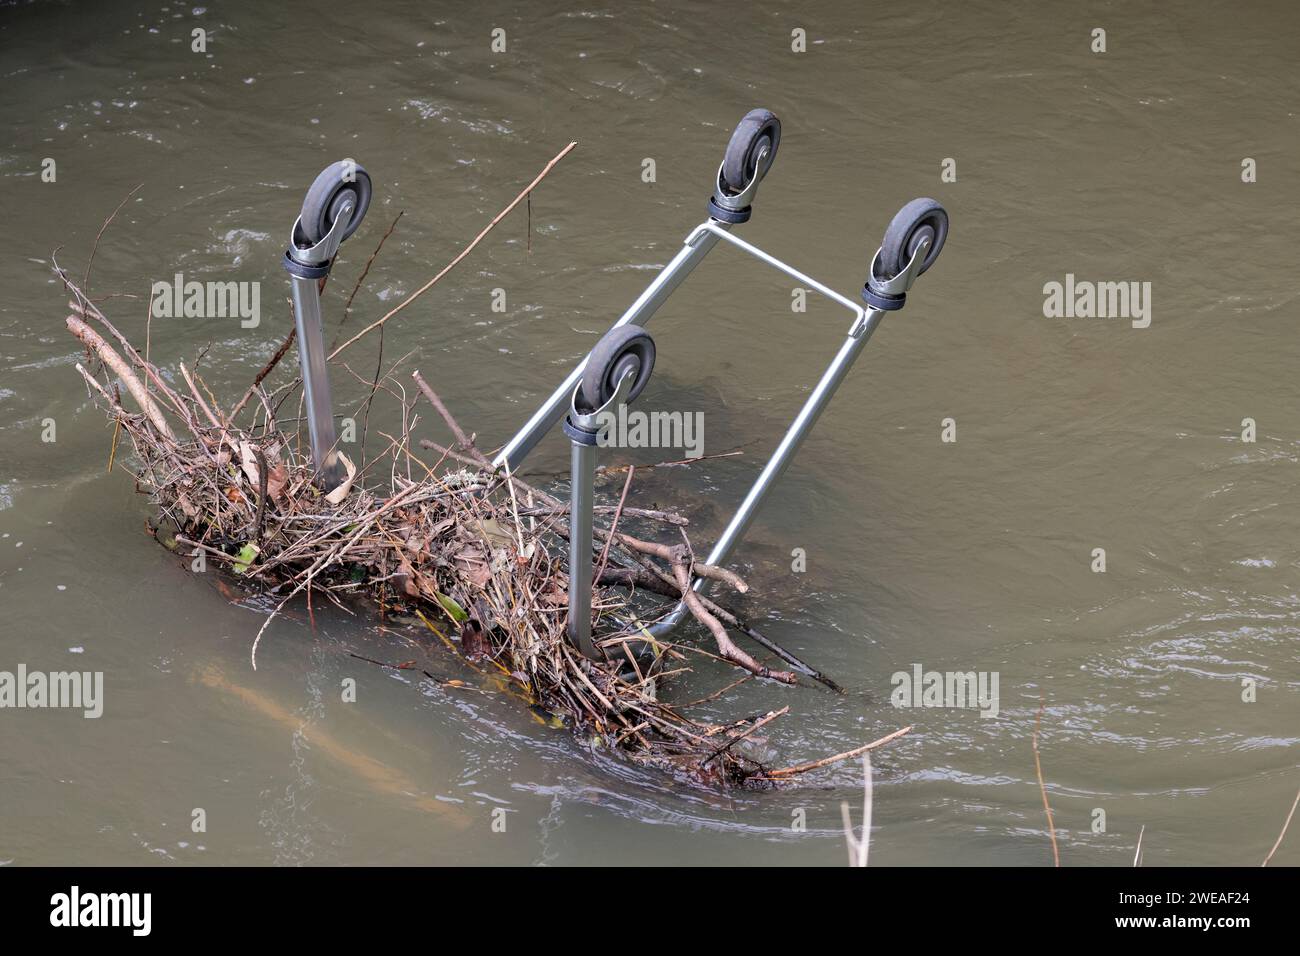 Shopping trolley in river Arun in Horsham town thoughtless reckless bad behaviour destruction pollution theft disregard for wildlife and waterway's Stock Photo